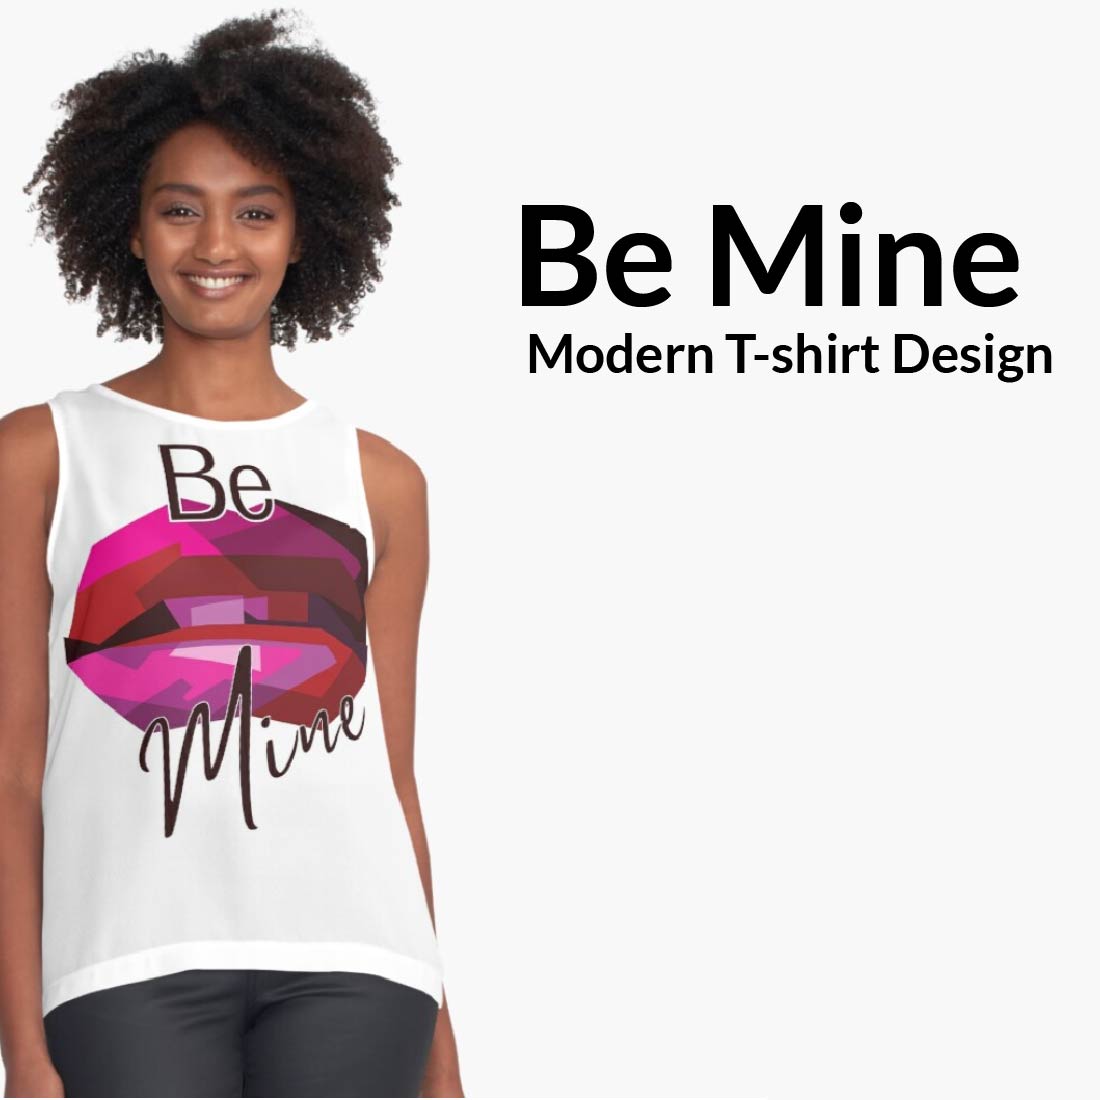 Be mine tshirt design preview image.